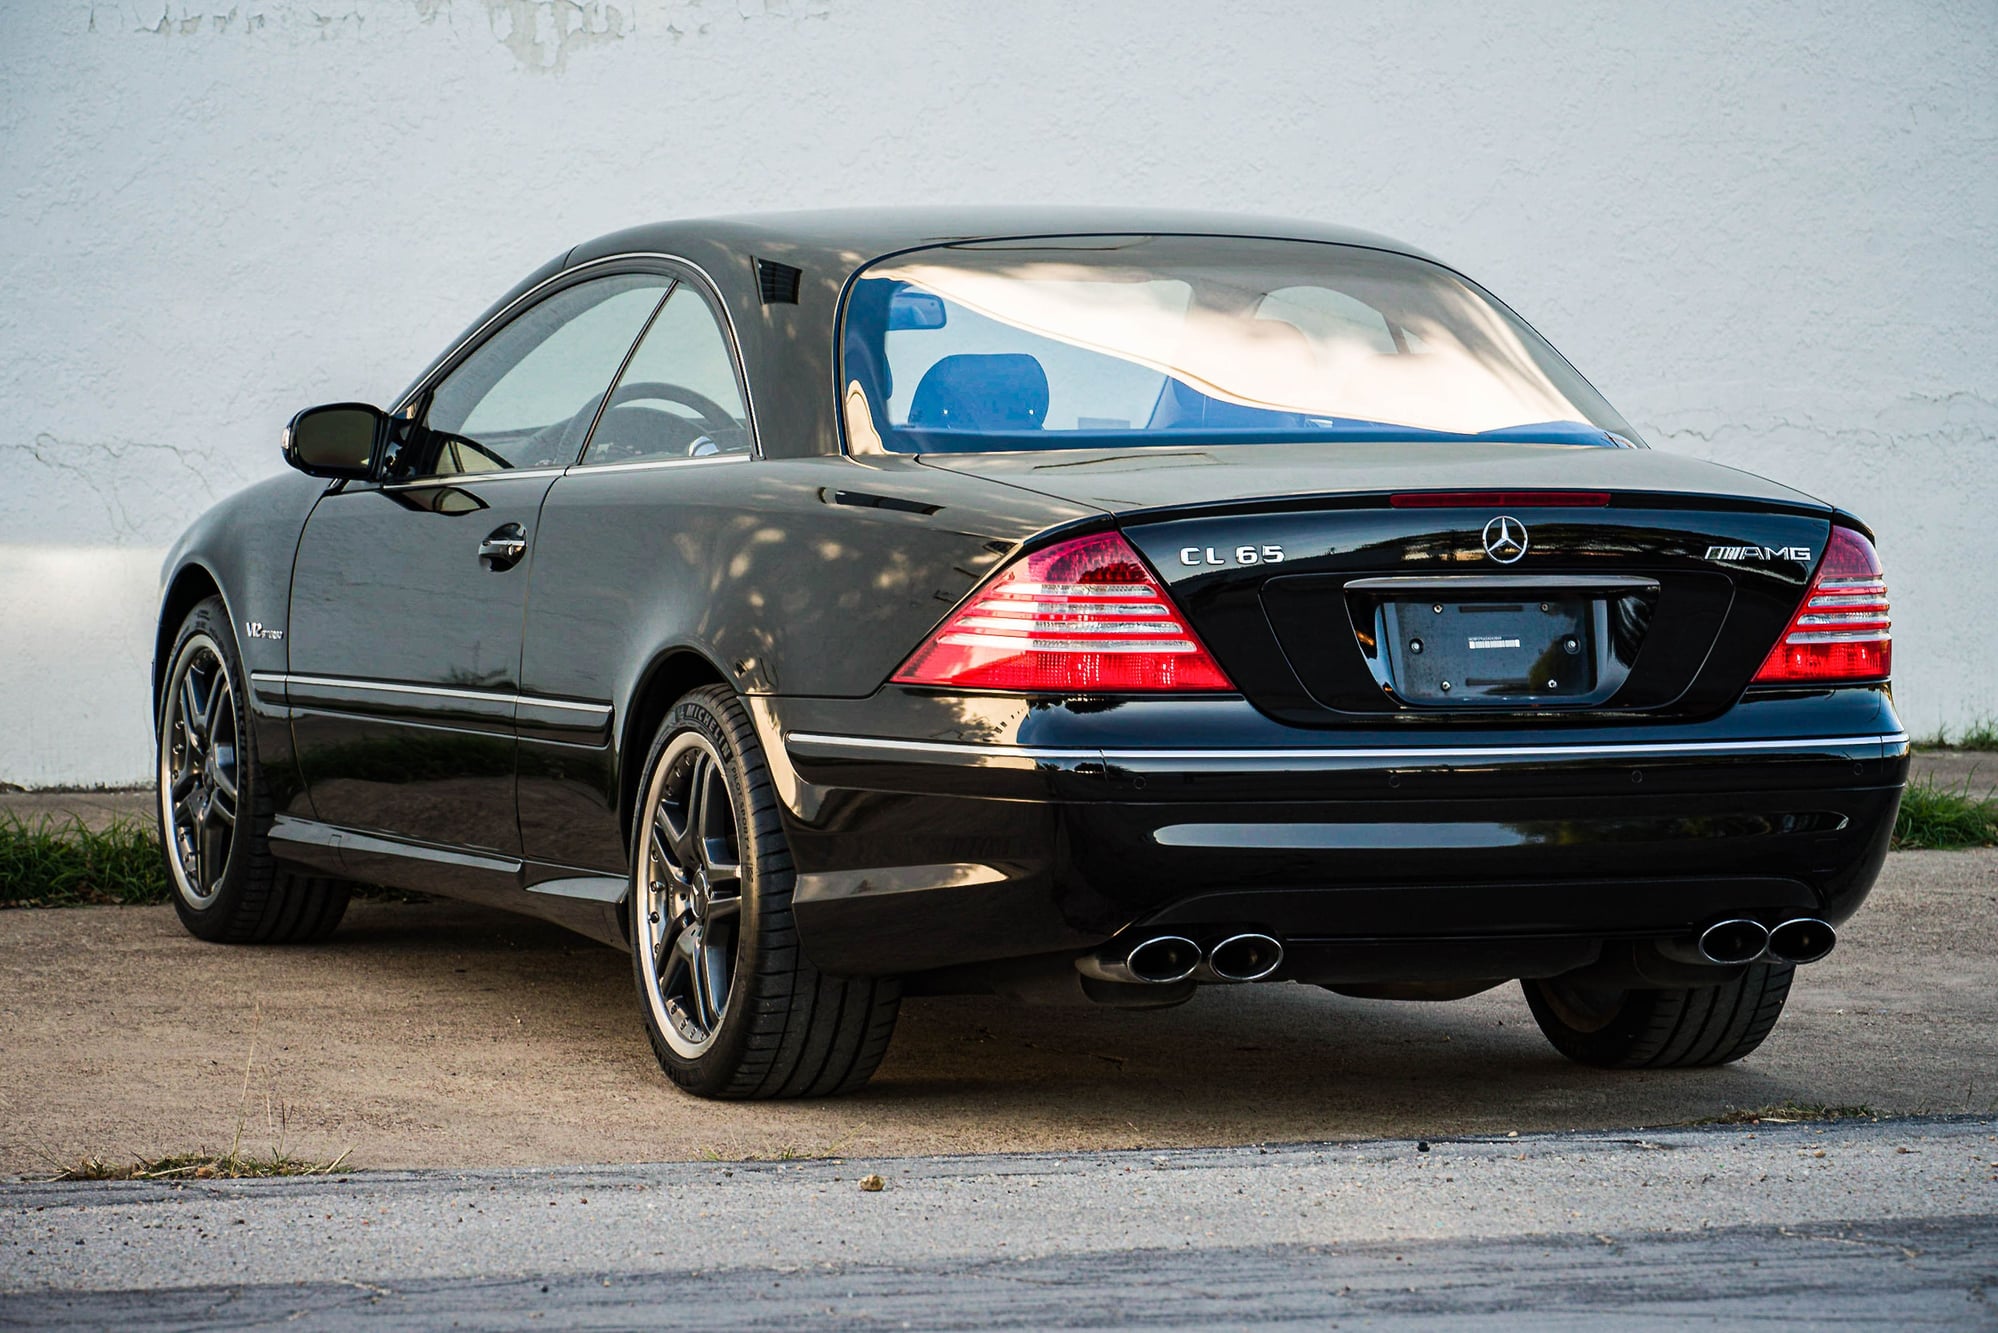 2005 Mercedes-Benz CL65 AMG - 2005 Mercedes Benz CL65 AMG - Used - VIN WDBPJ79J65A043869 - 31,045 Miles - 12 cyl - 2WD - Automatic - Coupe - Black - Waco, TX 76712, United States